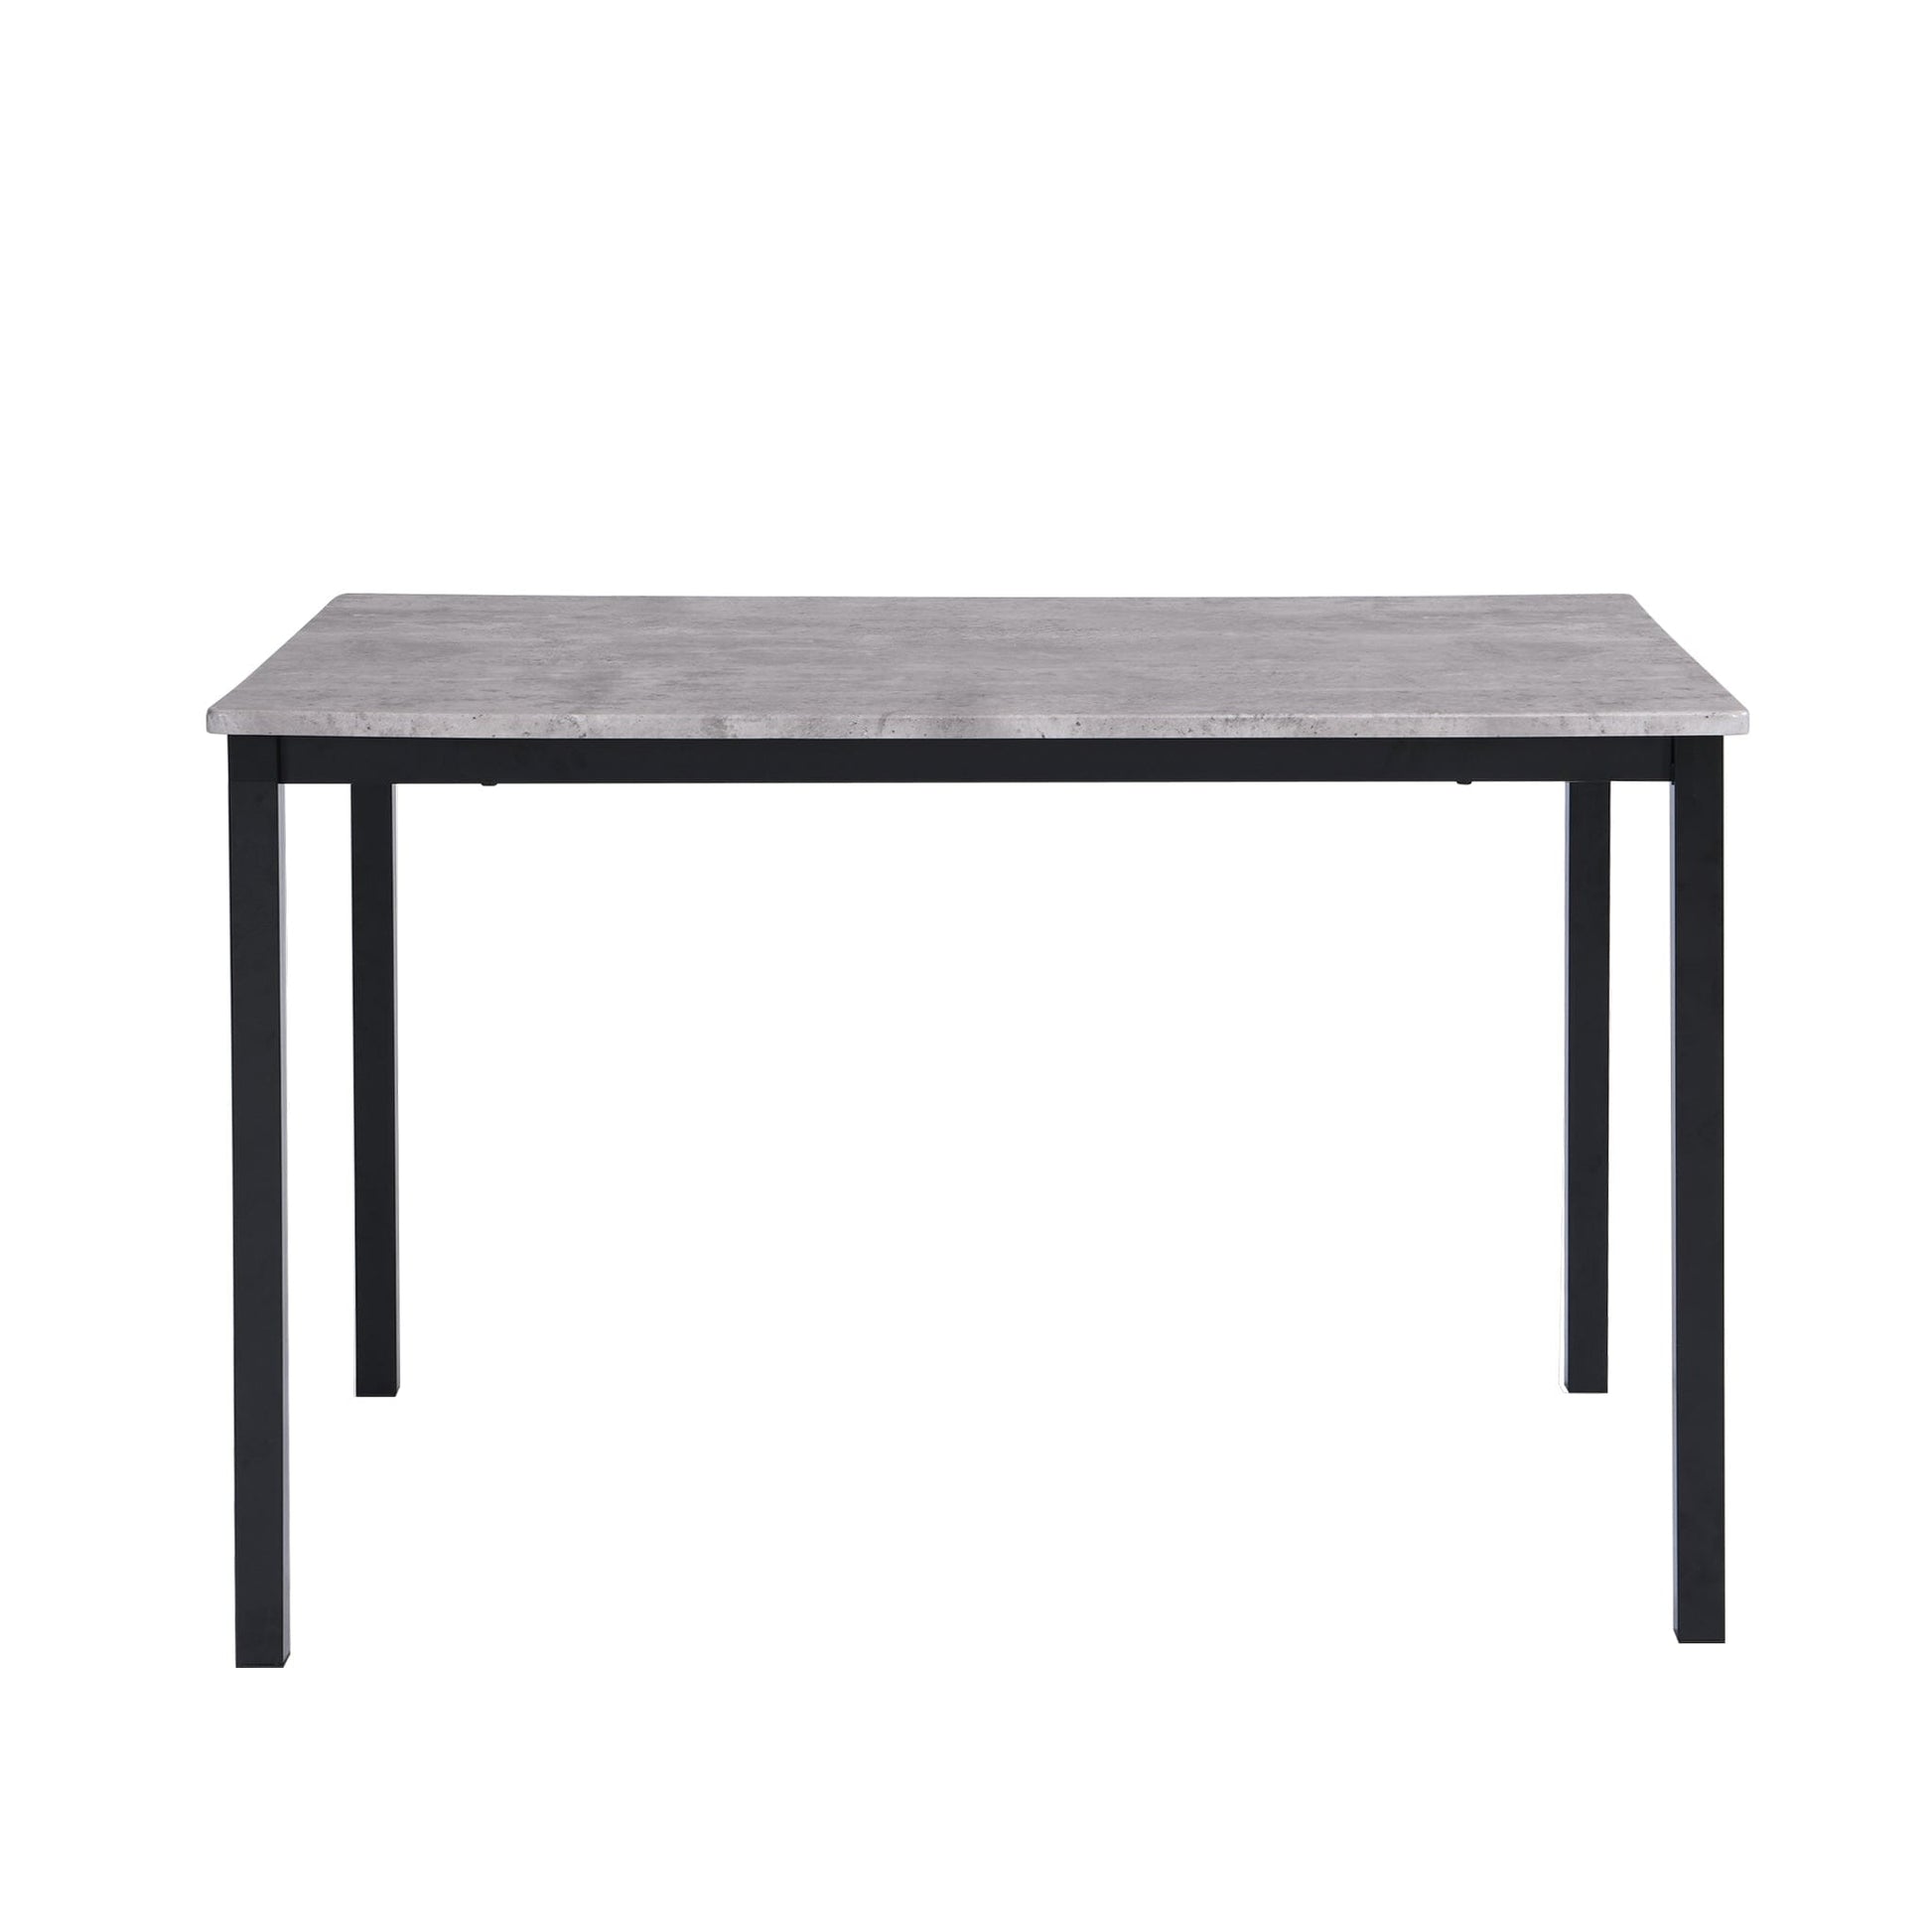 Milo Concrete Table - 6 Seater - Ellis Grey and Black Chairs